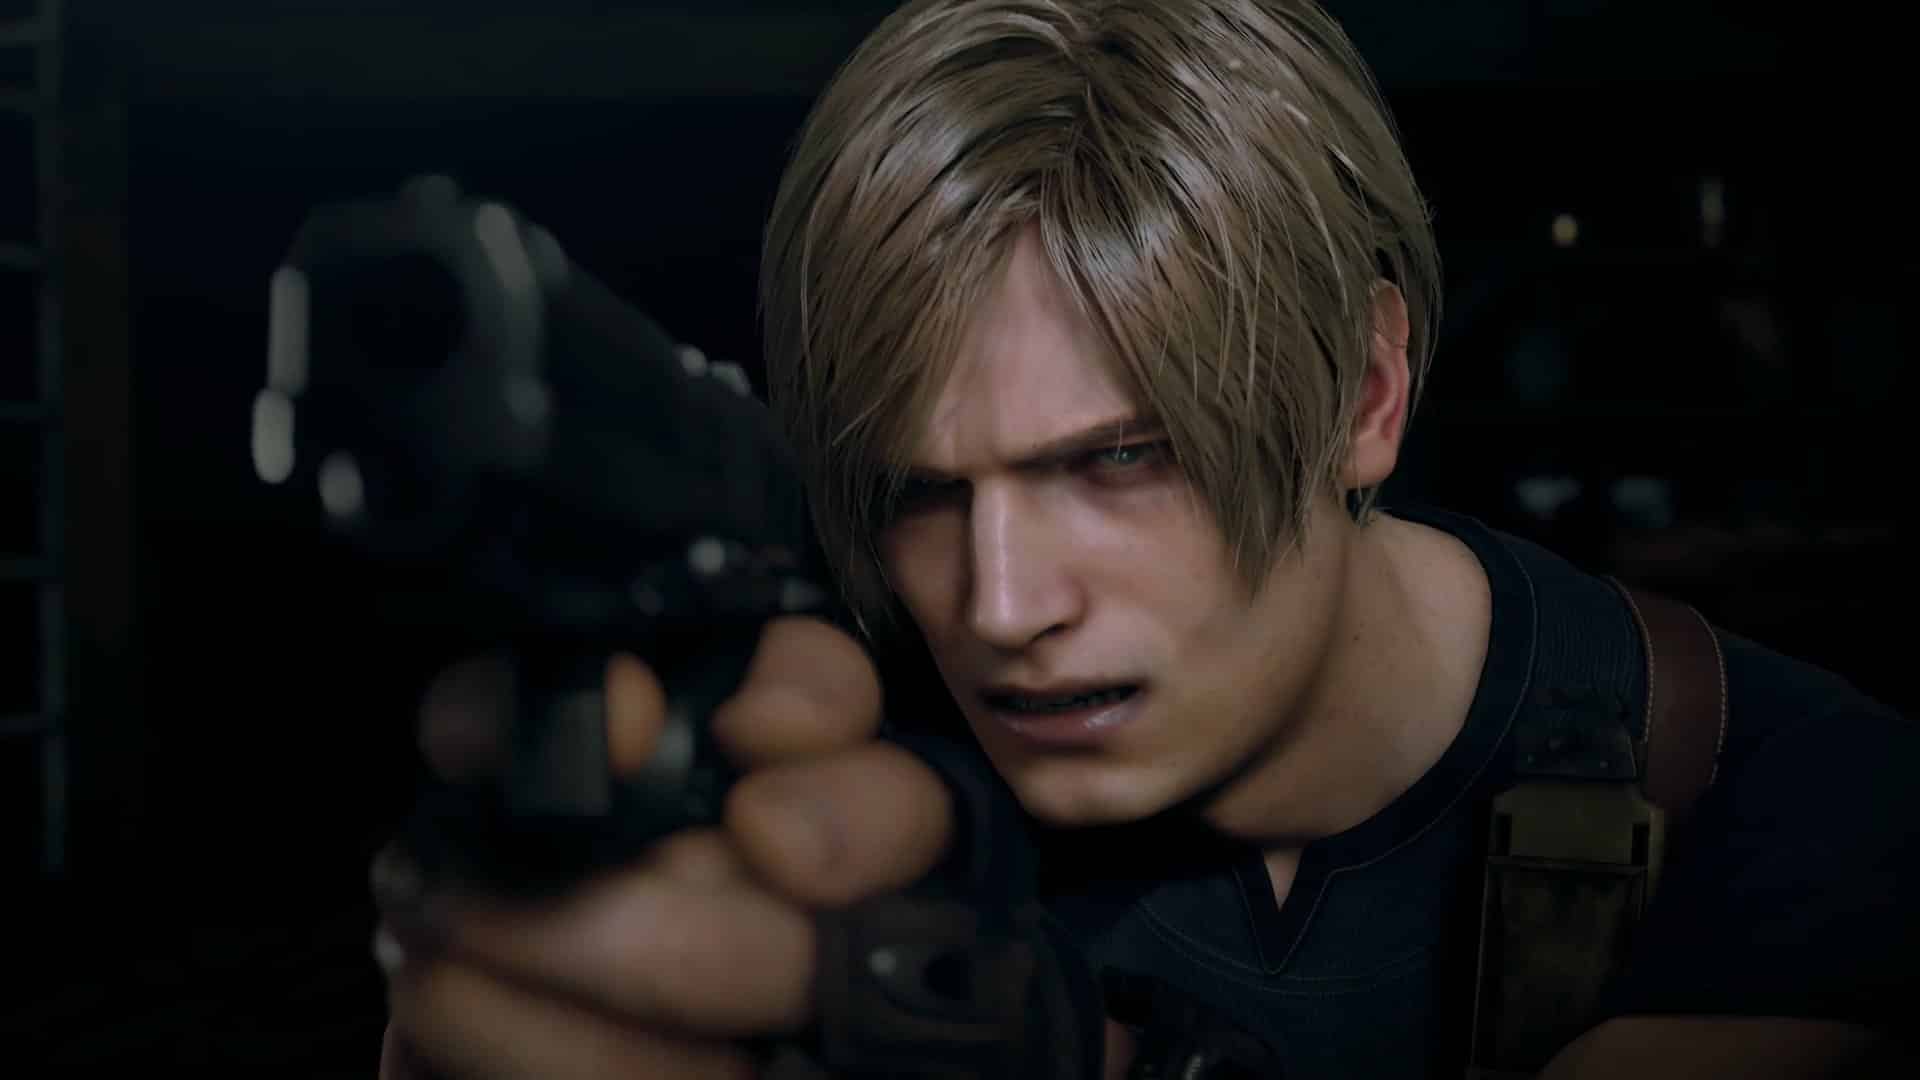 Resident Evil 4 trailer debuts new action gameplay, announces